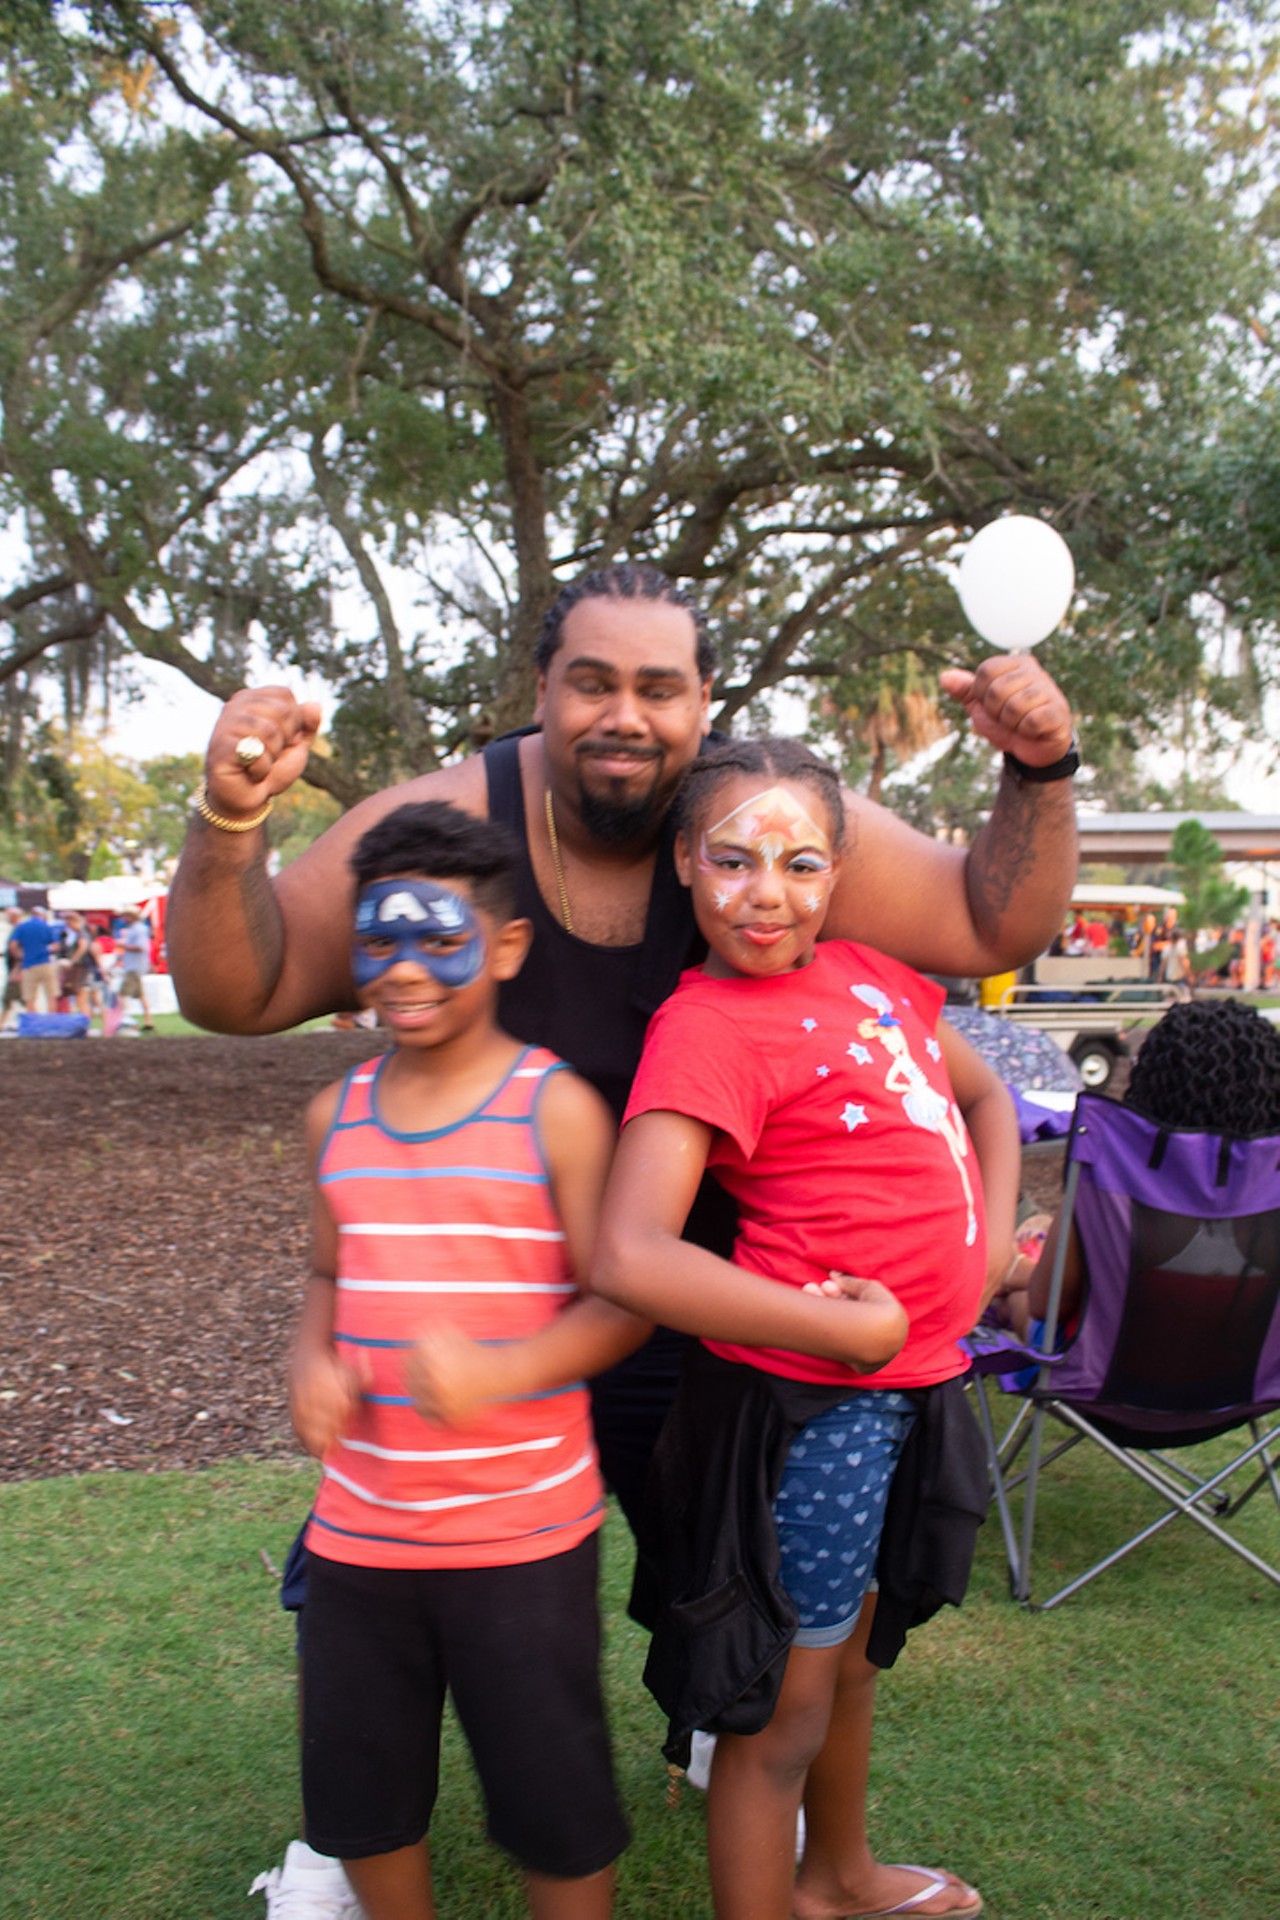 Everyone we saw at Tampa's 2019 Boom By The Bay 4th of July celebration